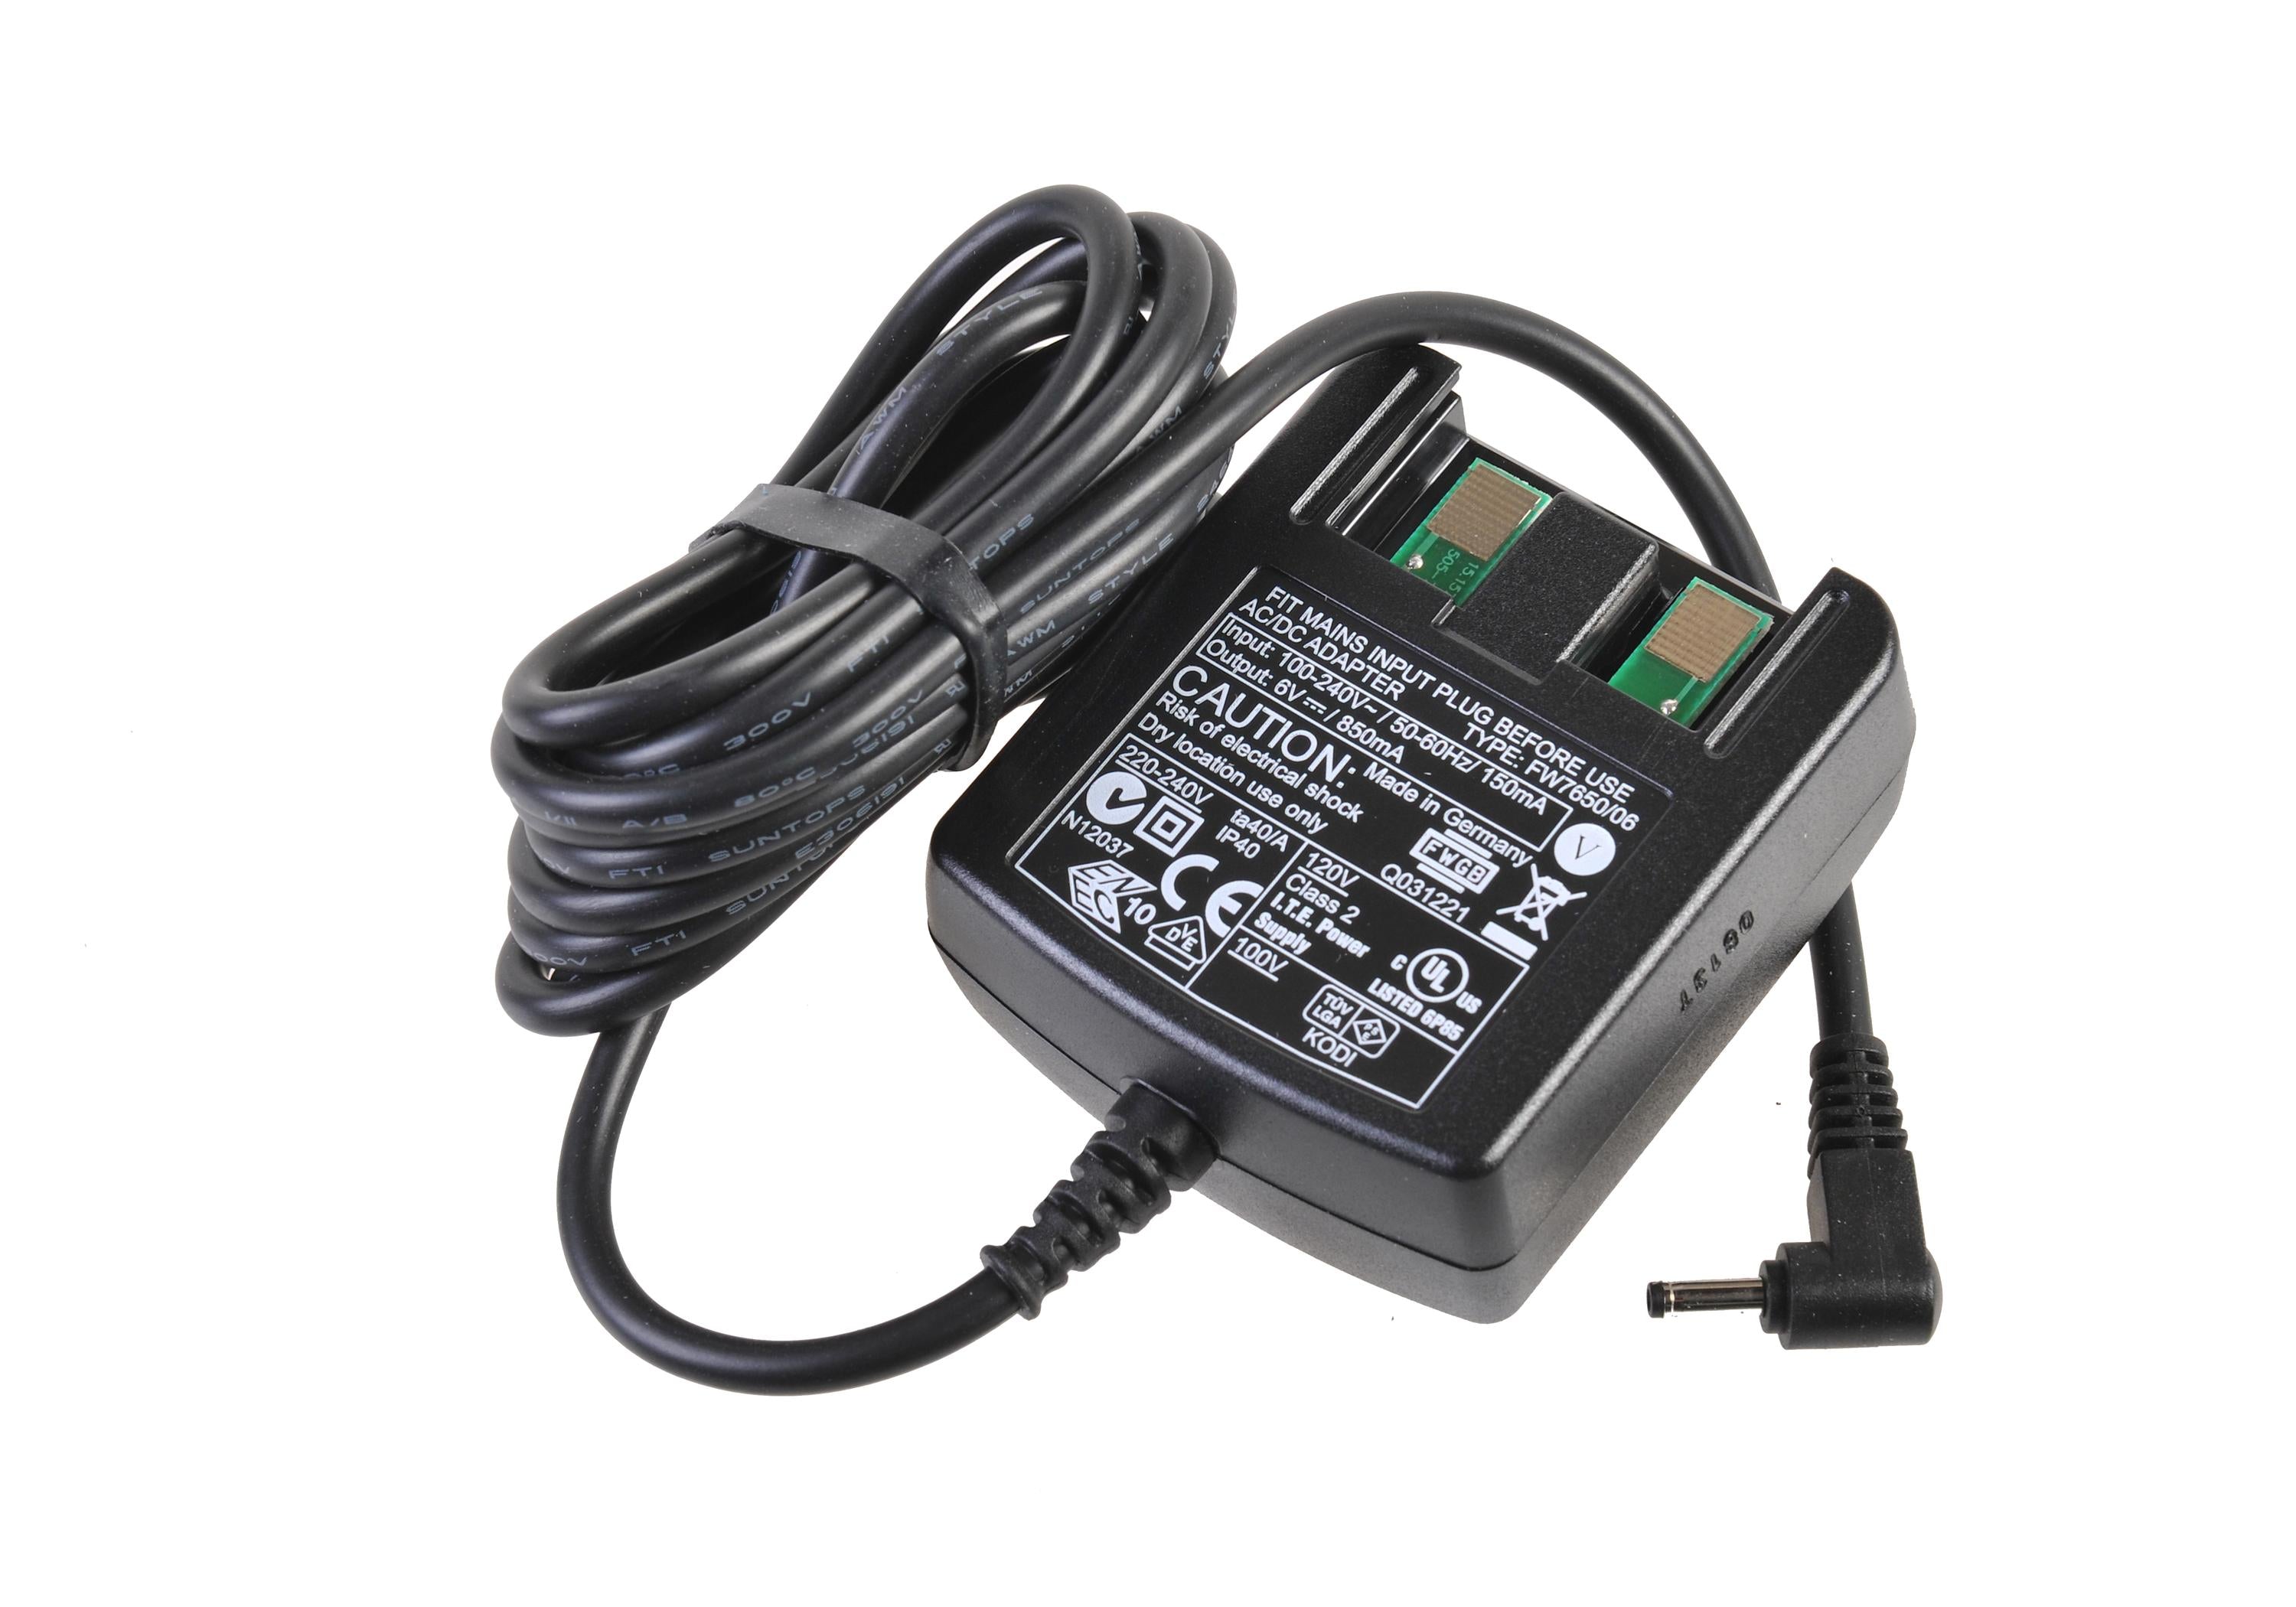 AC Charger with 4 International Adapters for the Iridium GO! Satellite Wi-Fi Hotspot